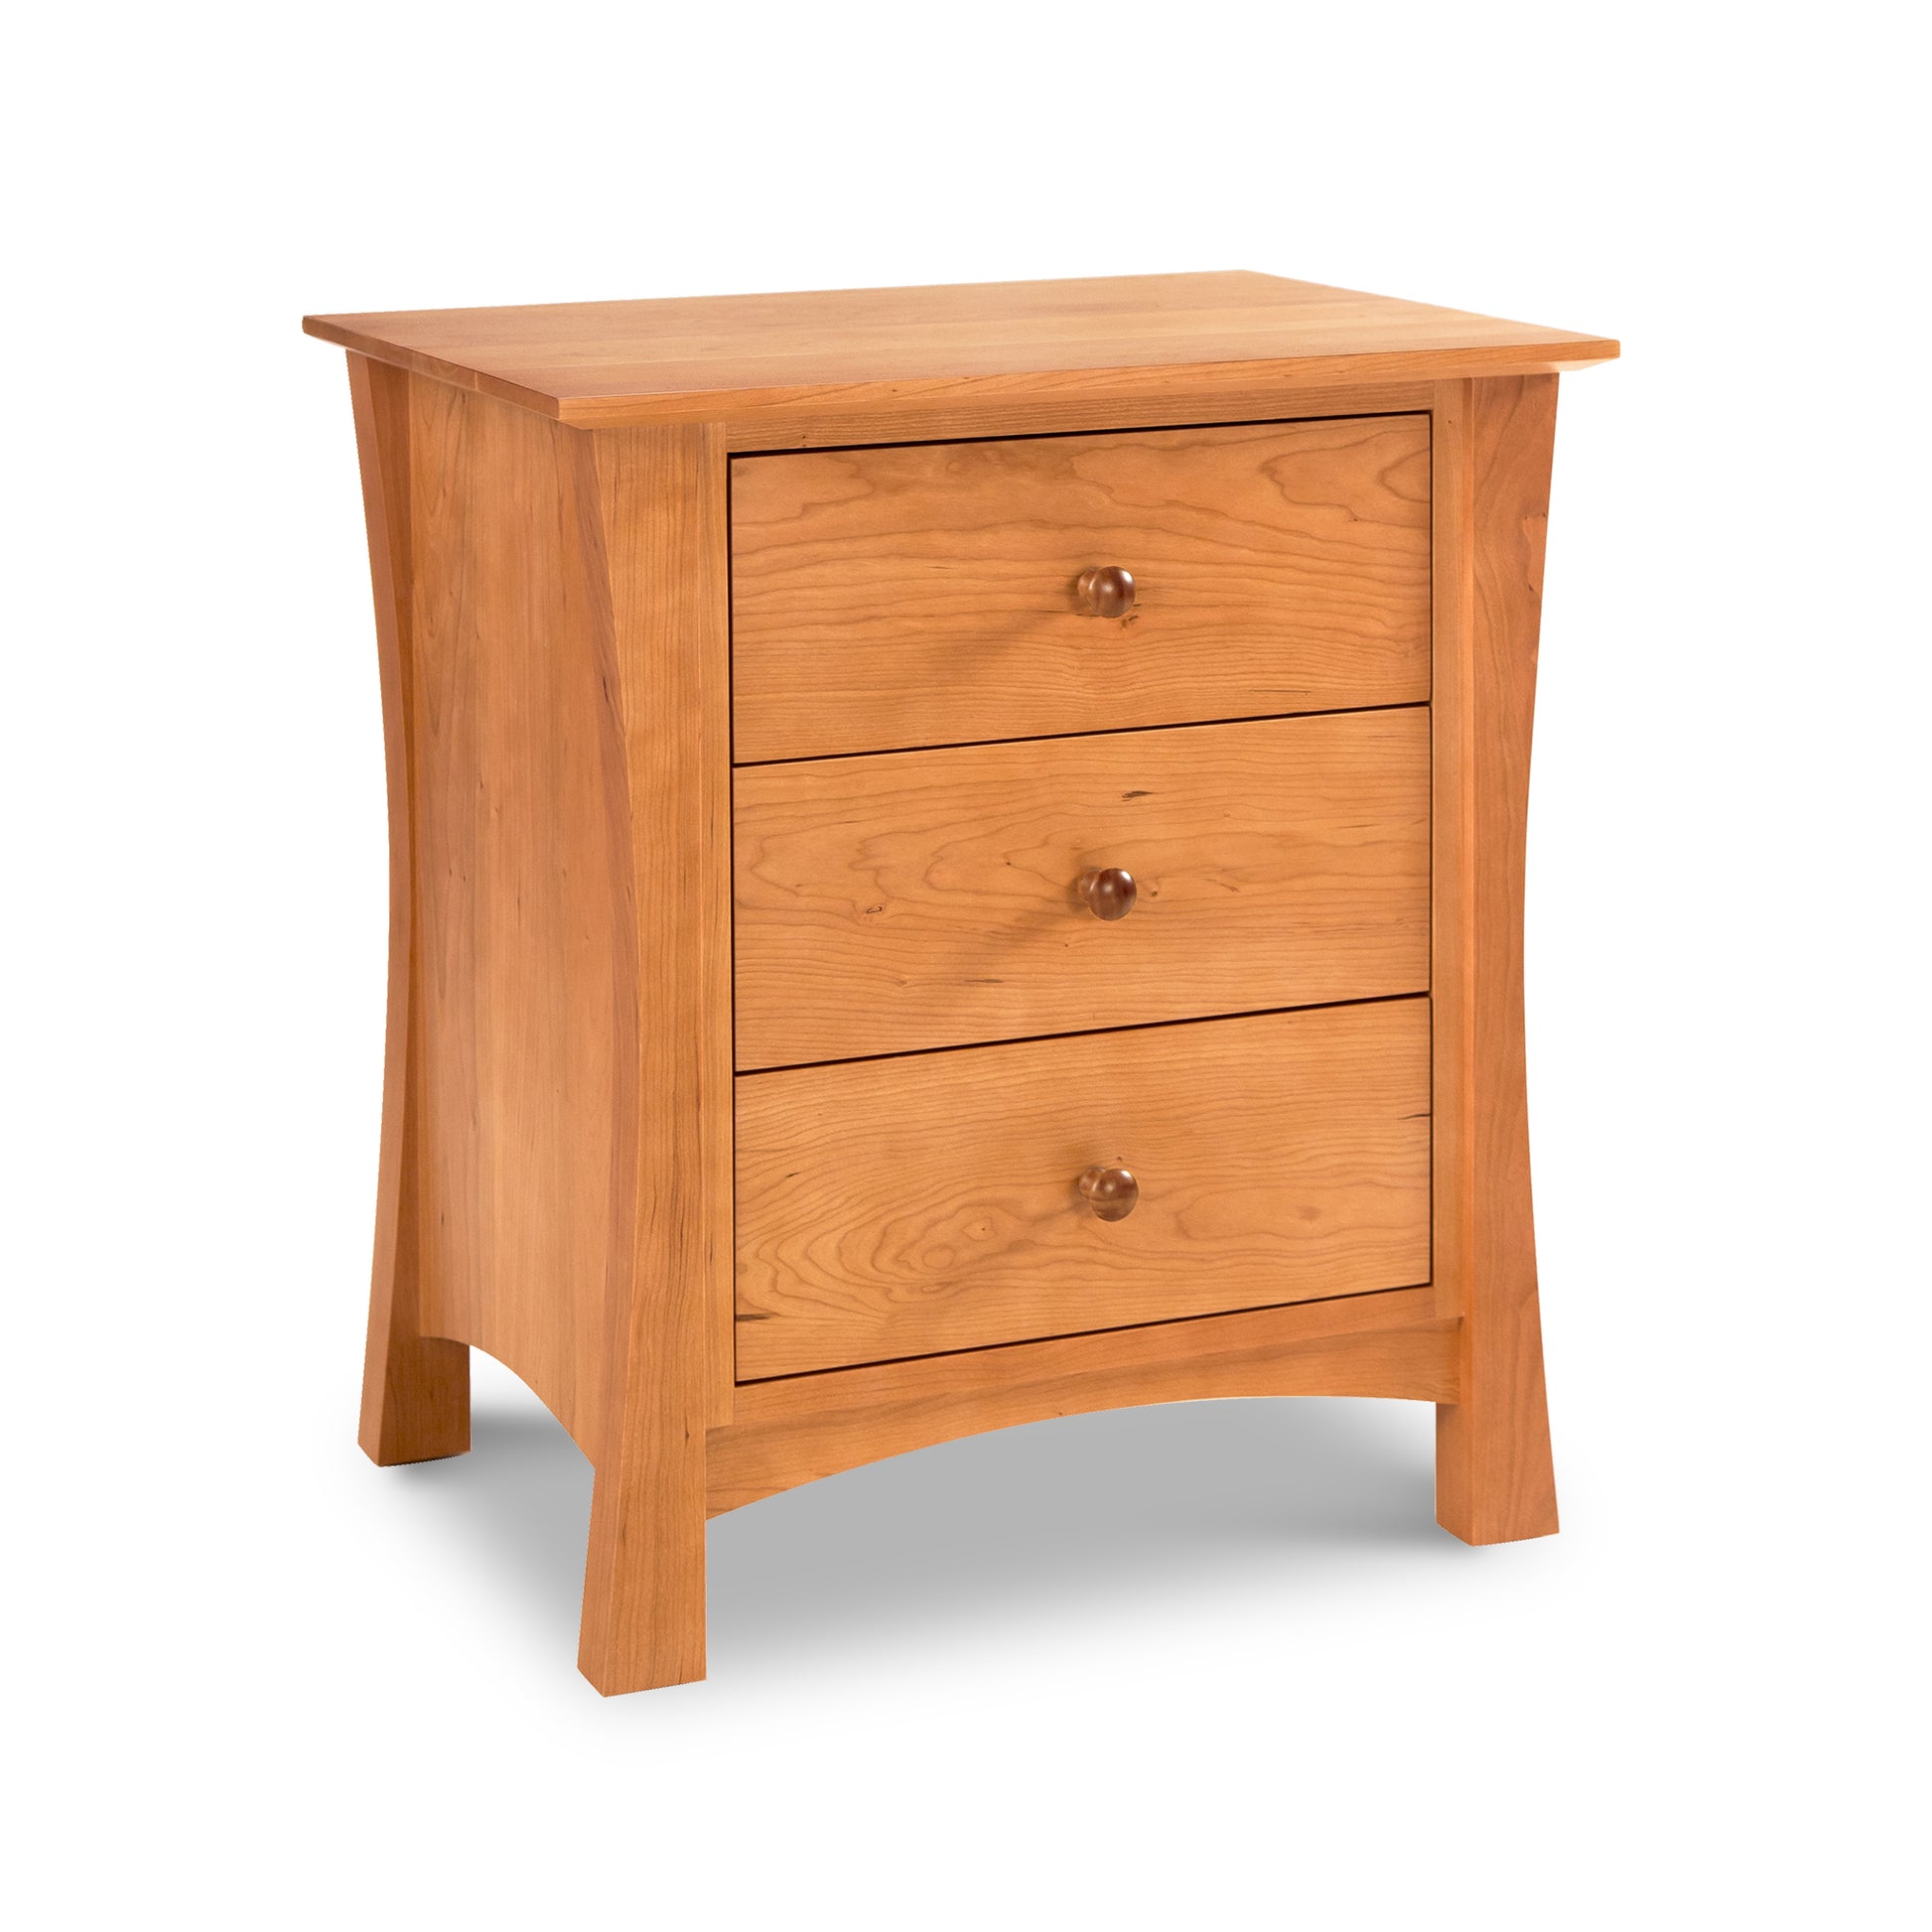 The Lyndon Furniture Andrews 3-Drawer Nightstand is a high-end bedroom collection piece that offers ample storage with its three drawers.